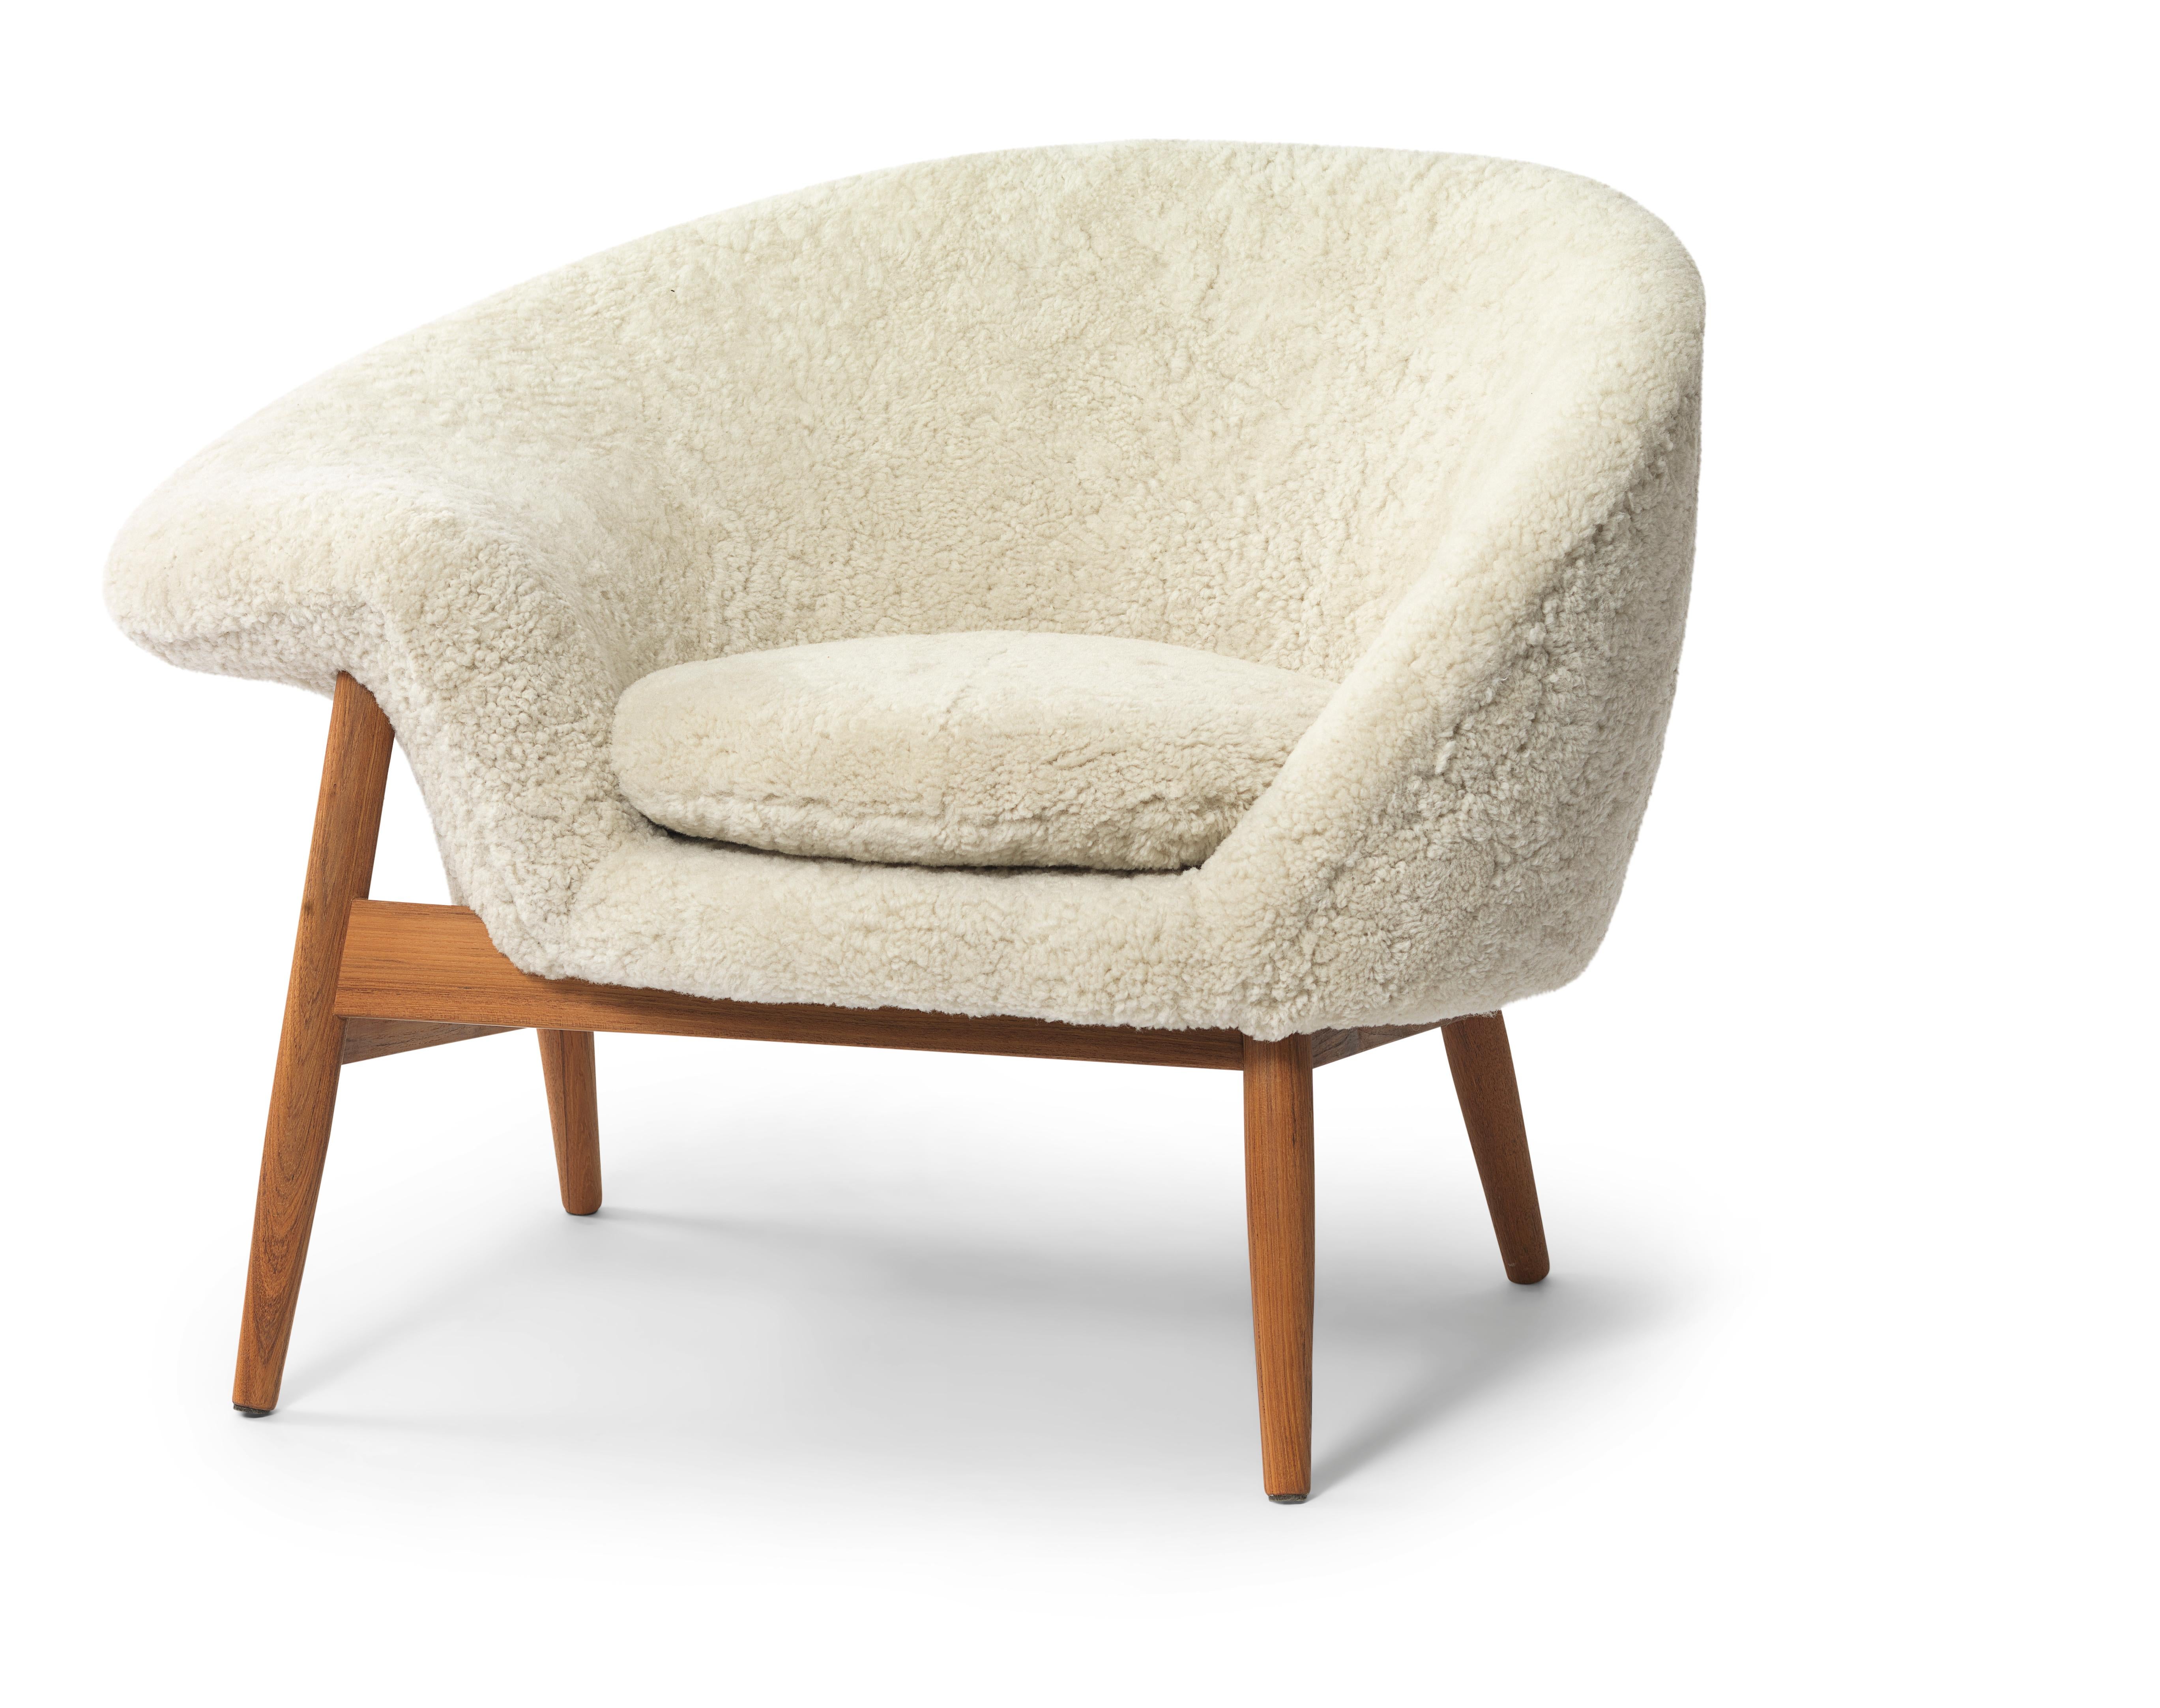 For Sale: Beige (Sheep Moonlight) Fried Egg Chair Sheep Chair, by Hans Olsen from Warm Nordic 2